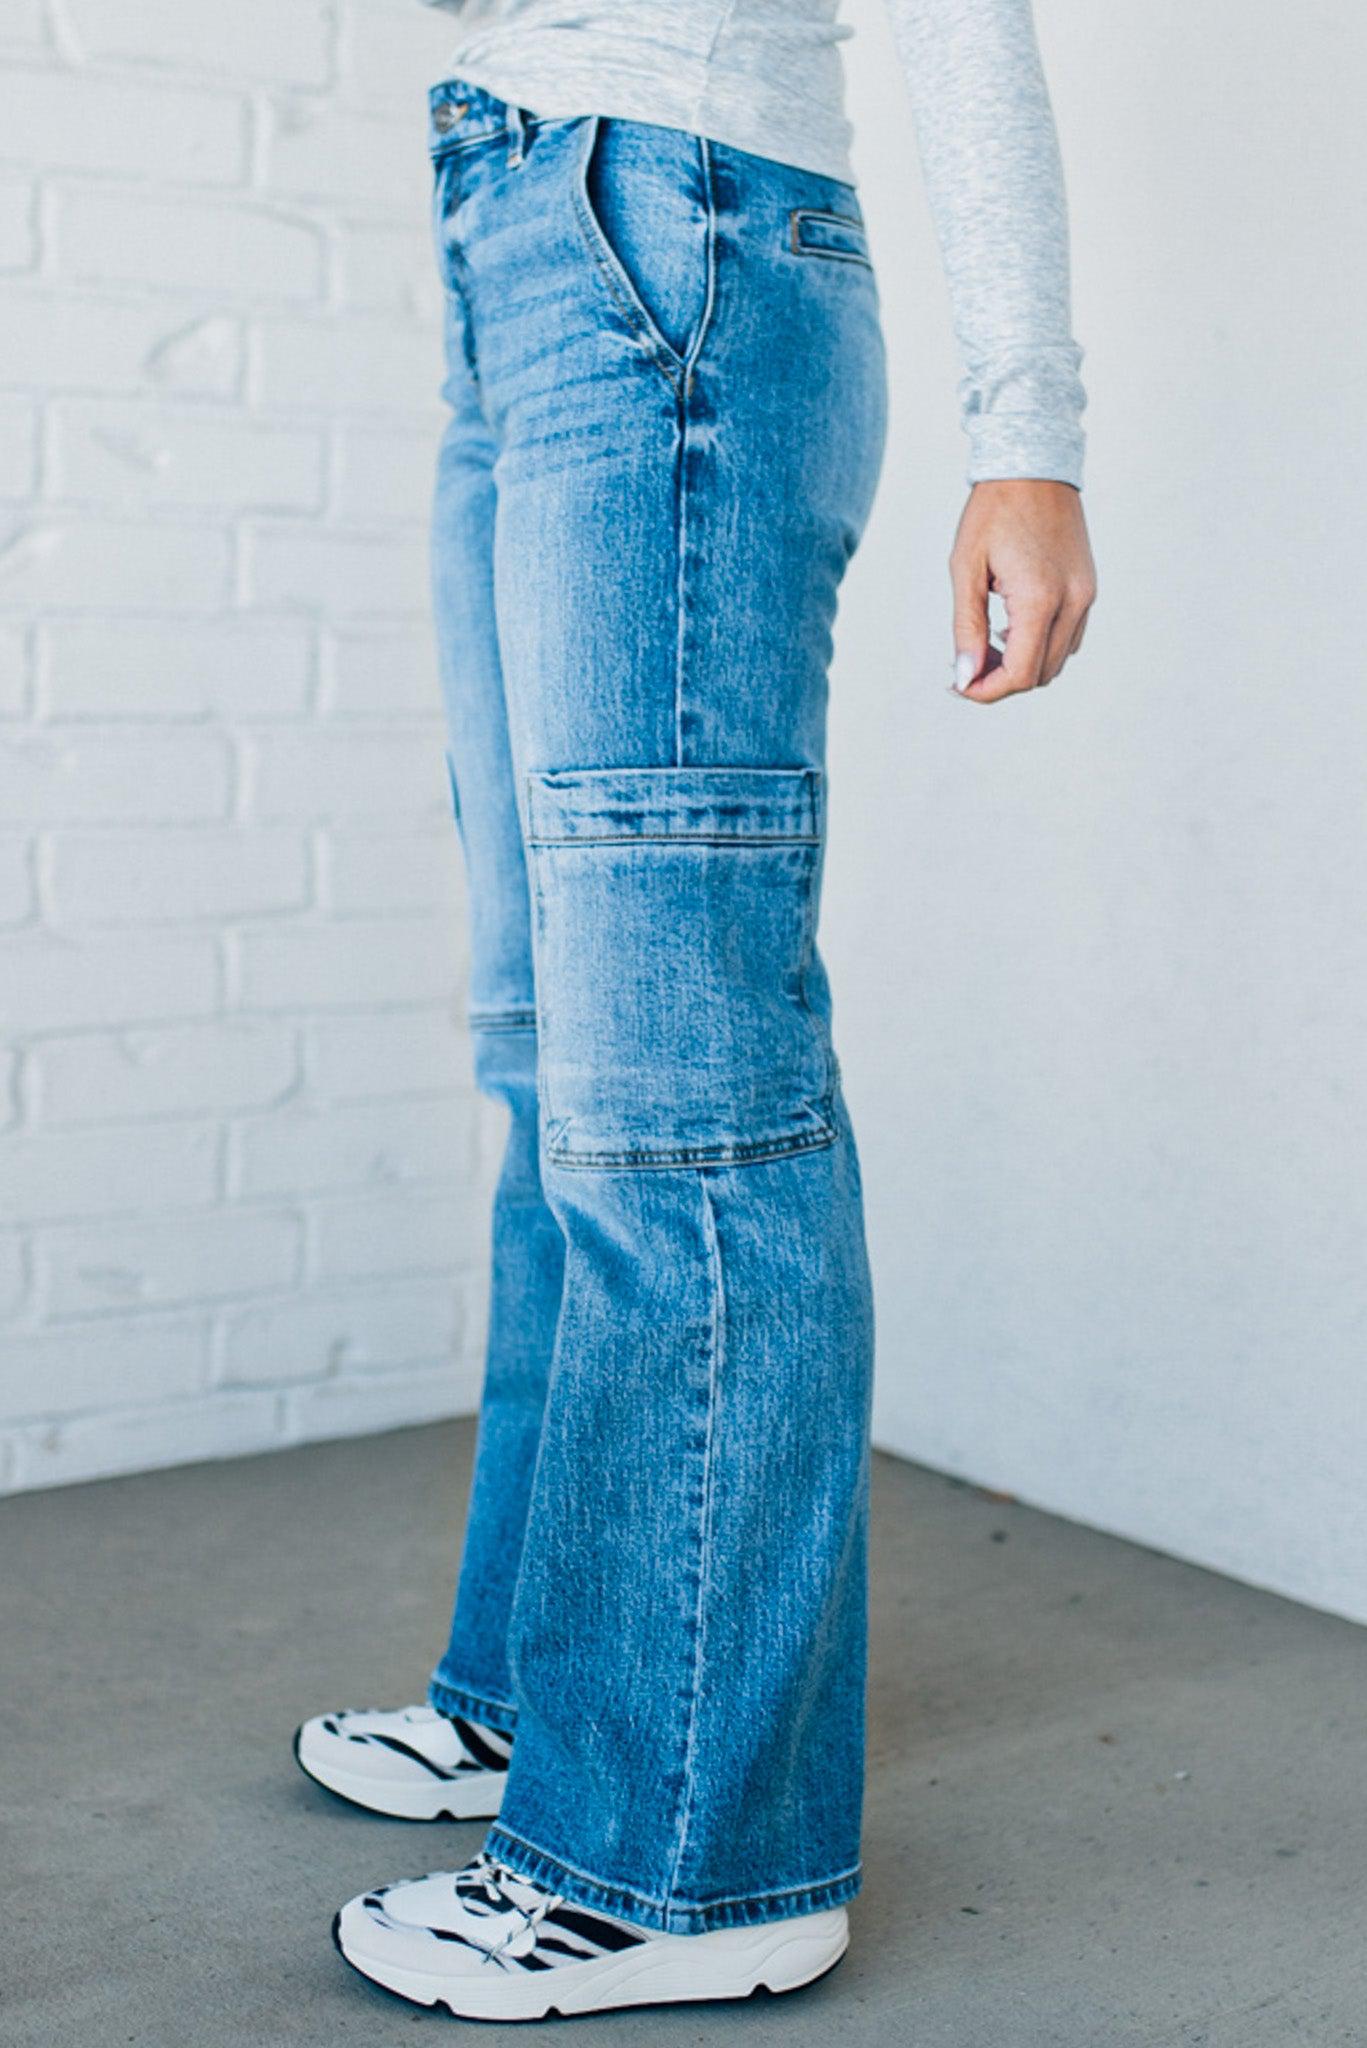 Alexis Cuffed Ankle Slim Fit Jeans